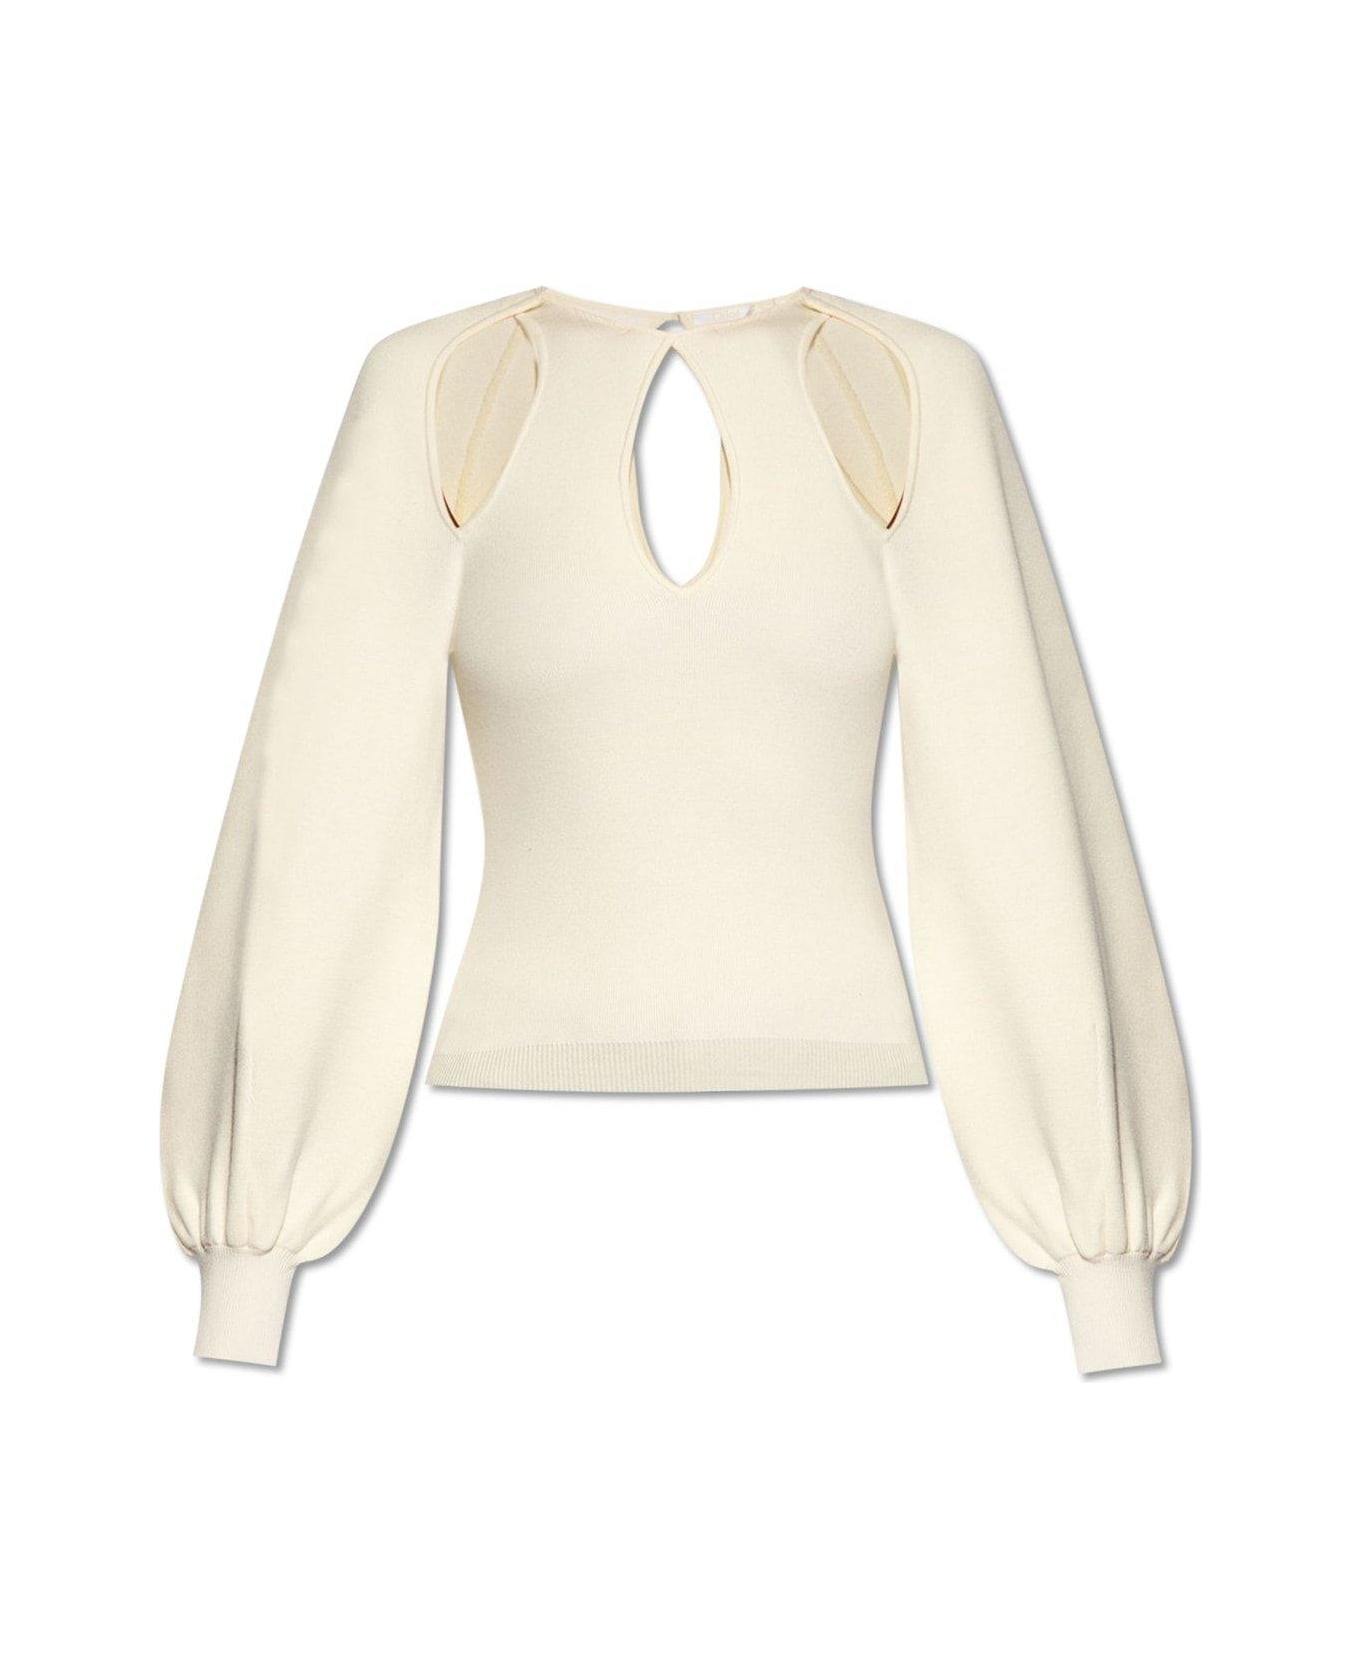 Chloé Puff-sleeved Cut-out Knit Top - Iconic milk ブラウス